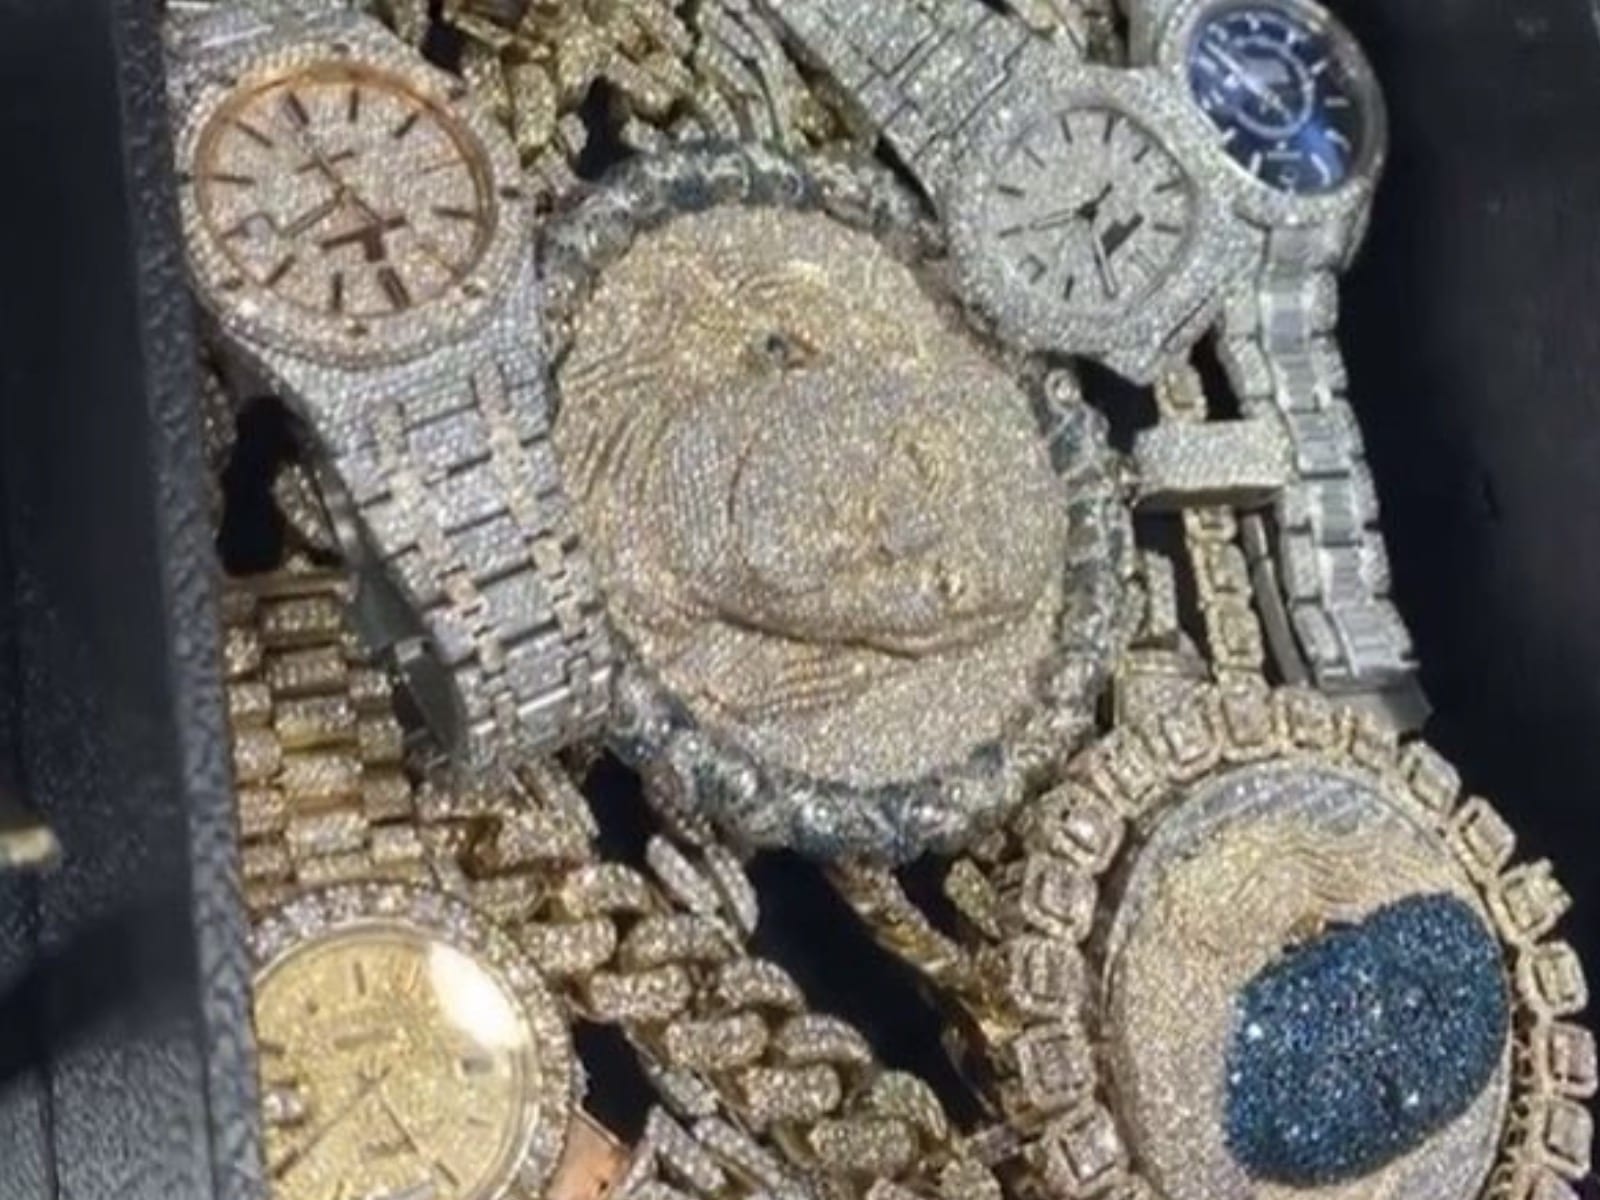 Blueface Shows Off His Insane Ice Collection: Who Got The Hardest